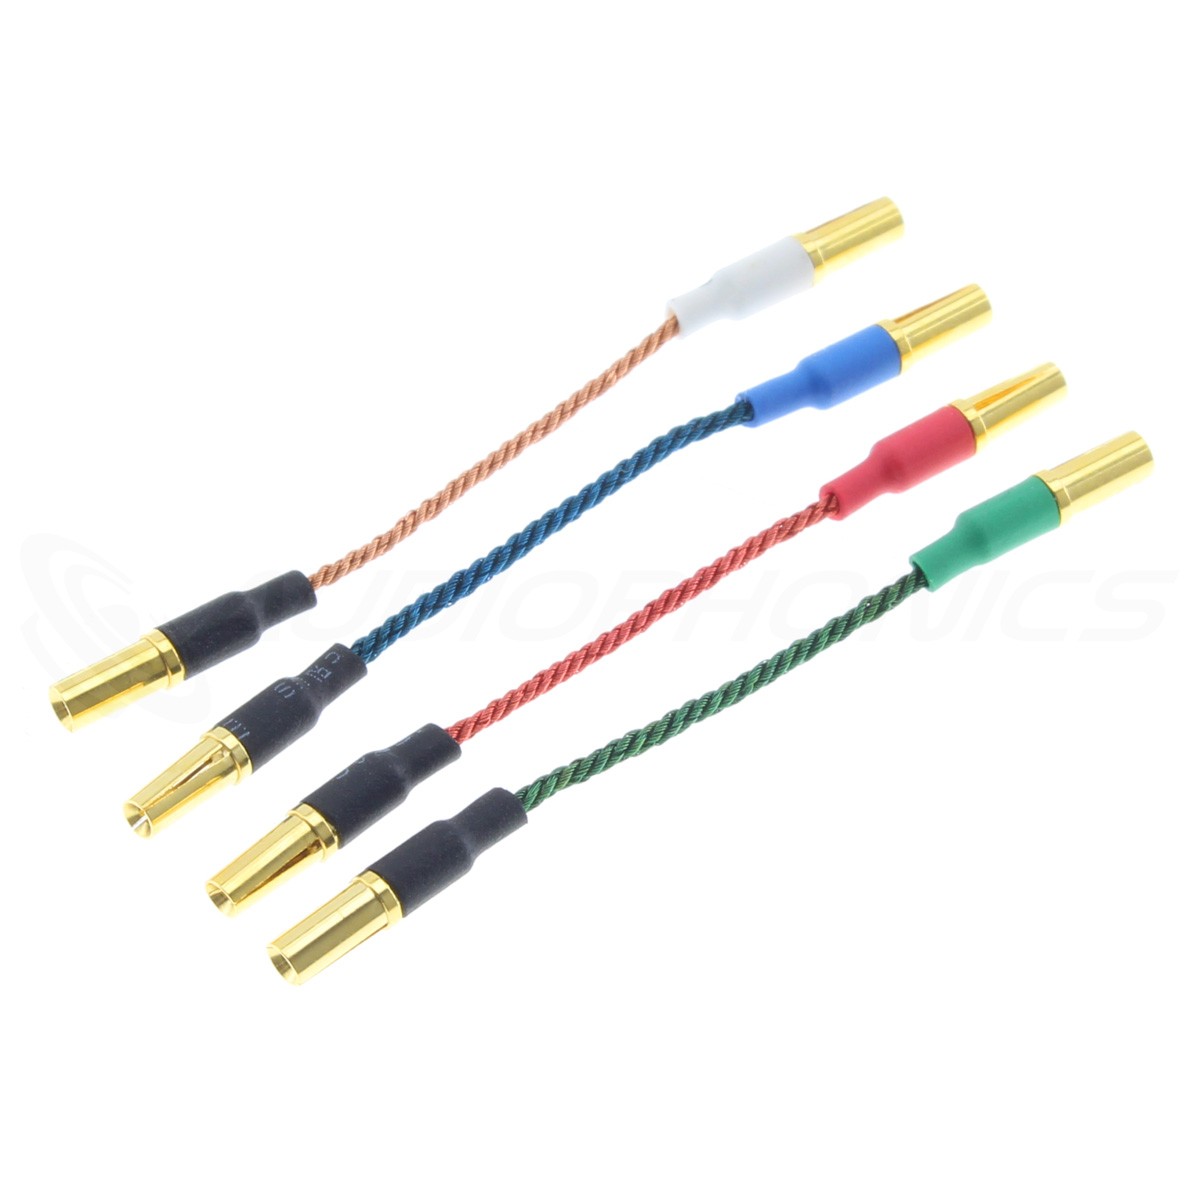 New 4 Piece High End Lead Wires with Gold Connectors for Headshell & Cartridges 